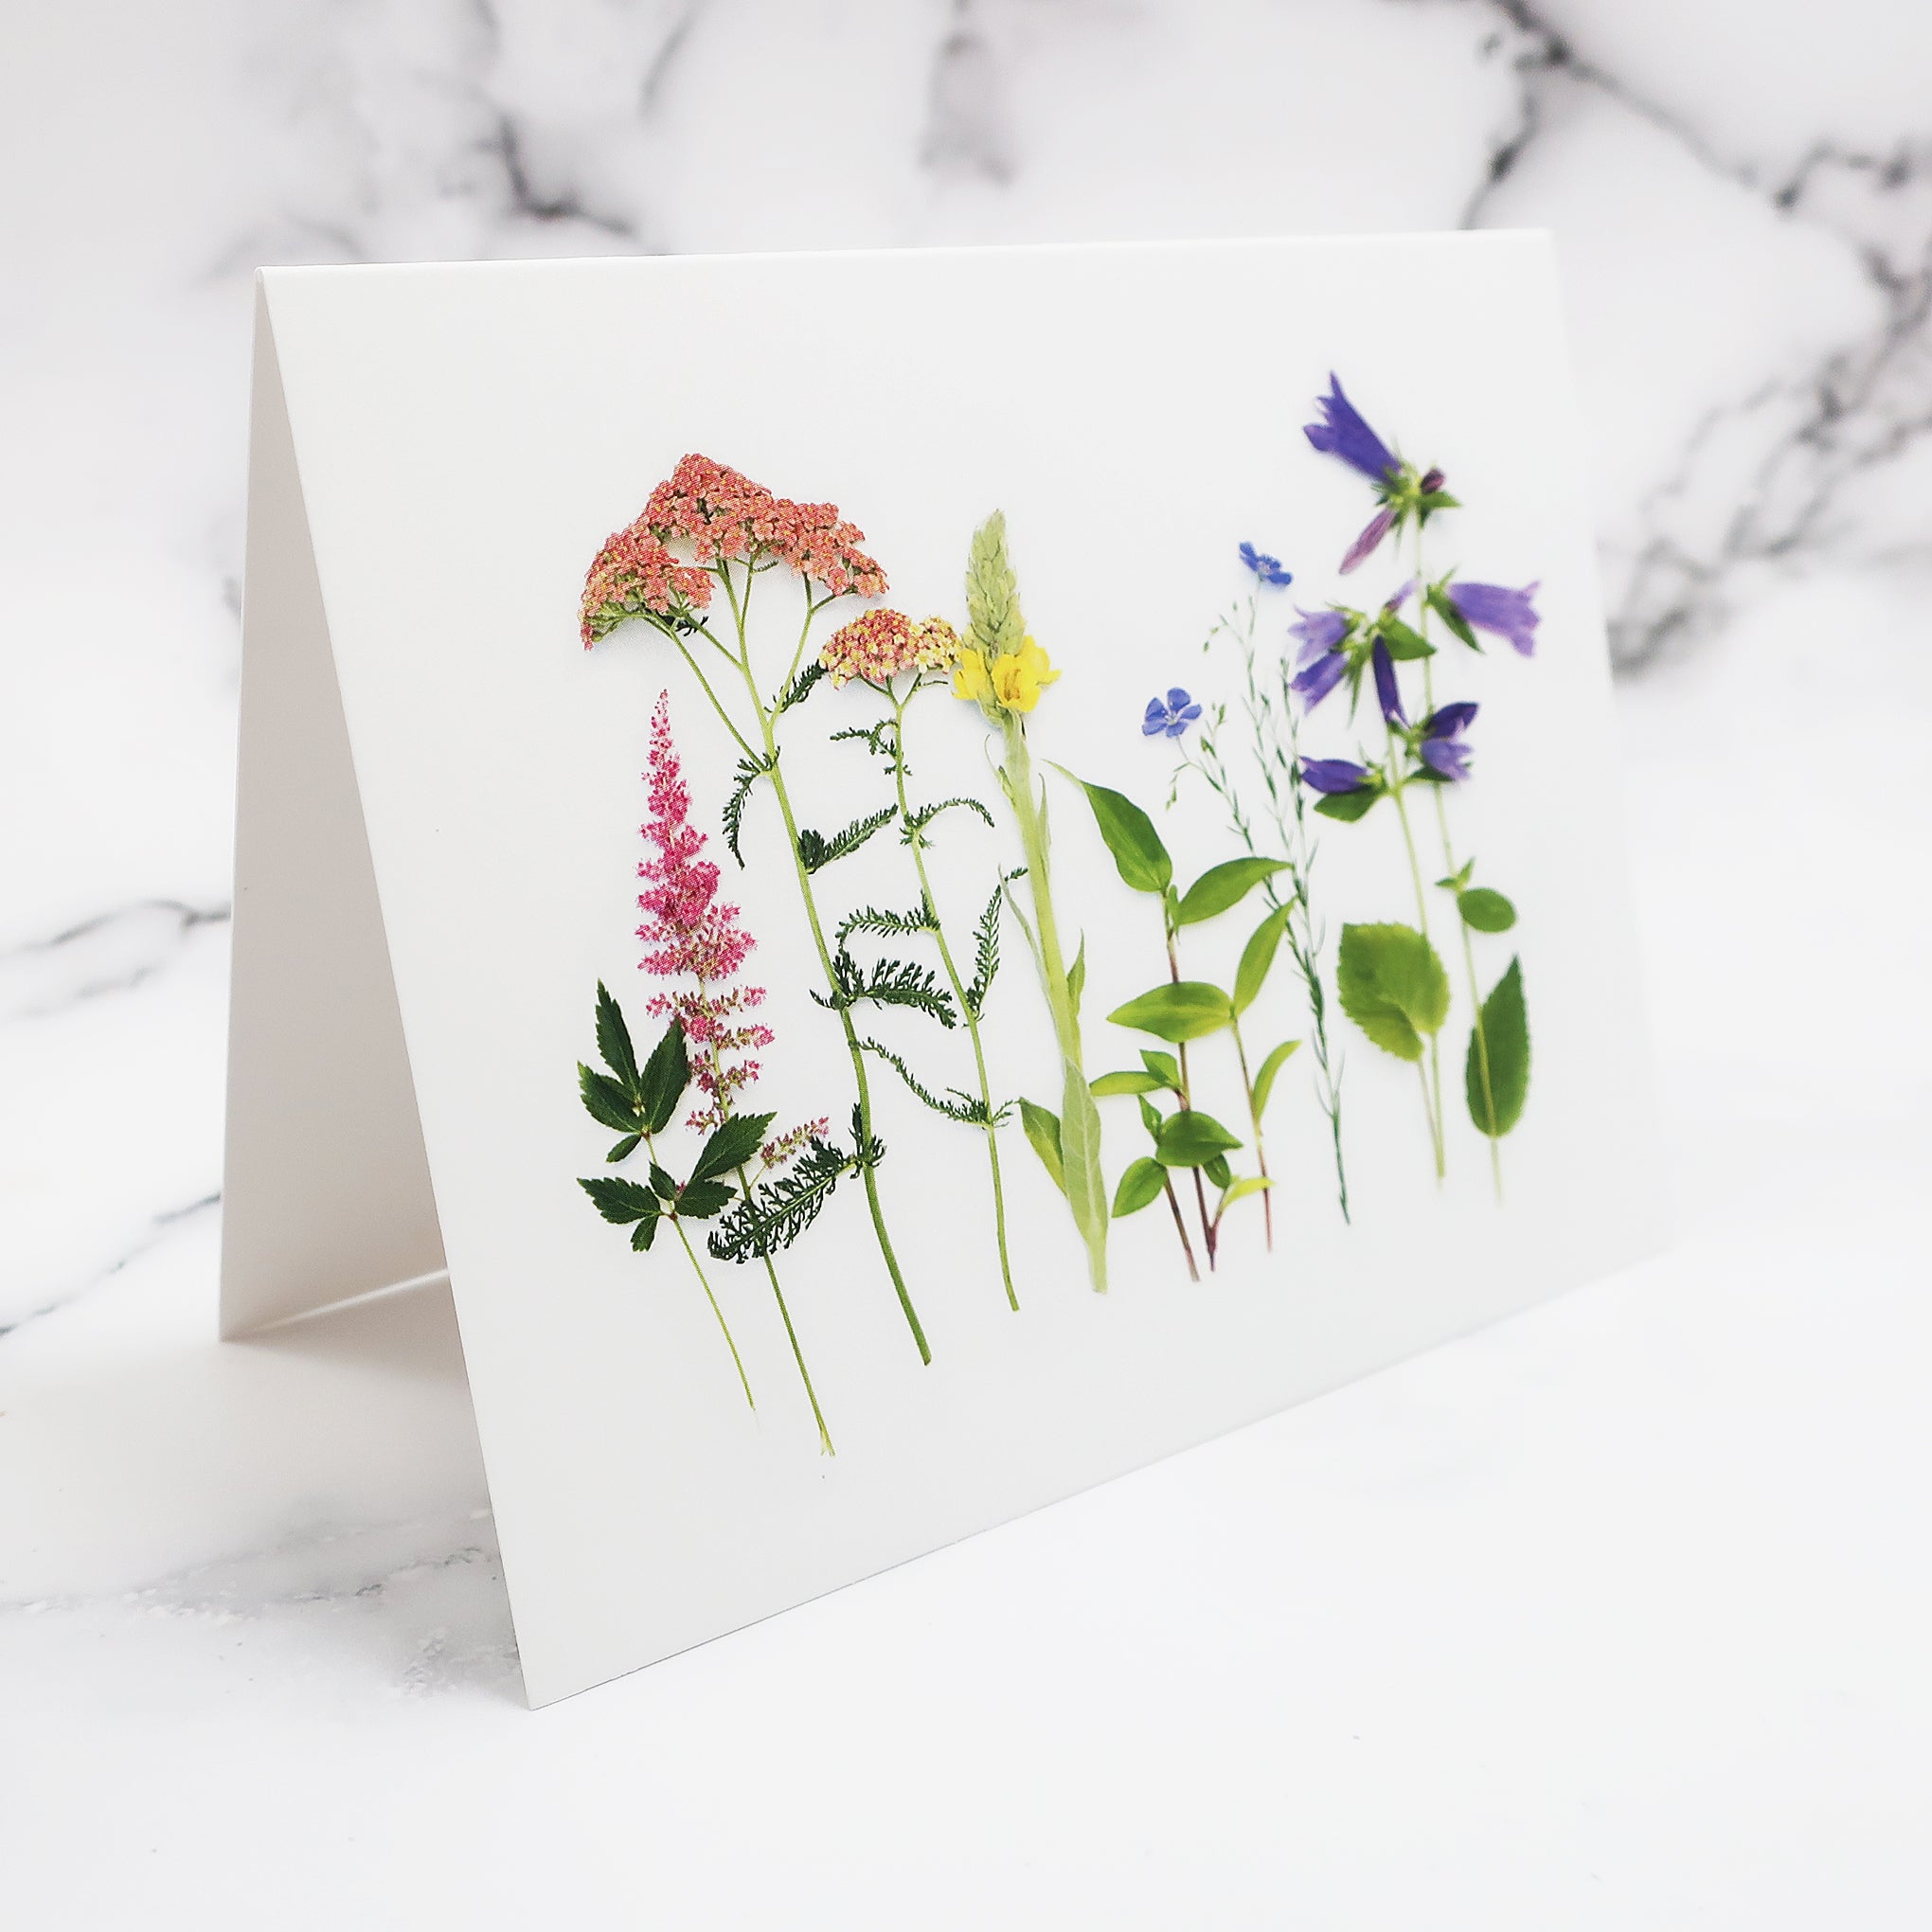 Blank Folding Greeting Card in Multicolor Wildflowers and Greenery